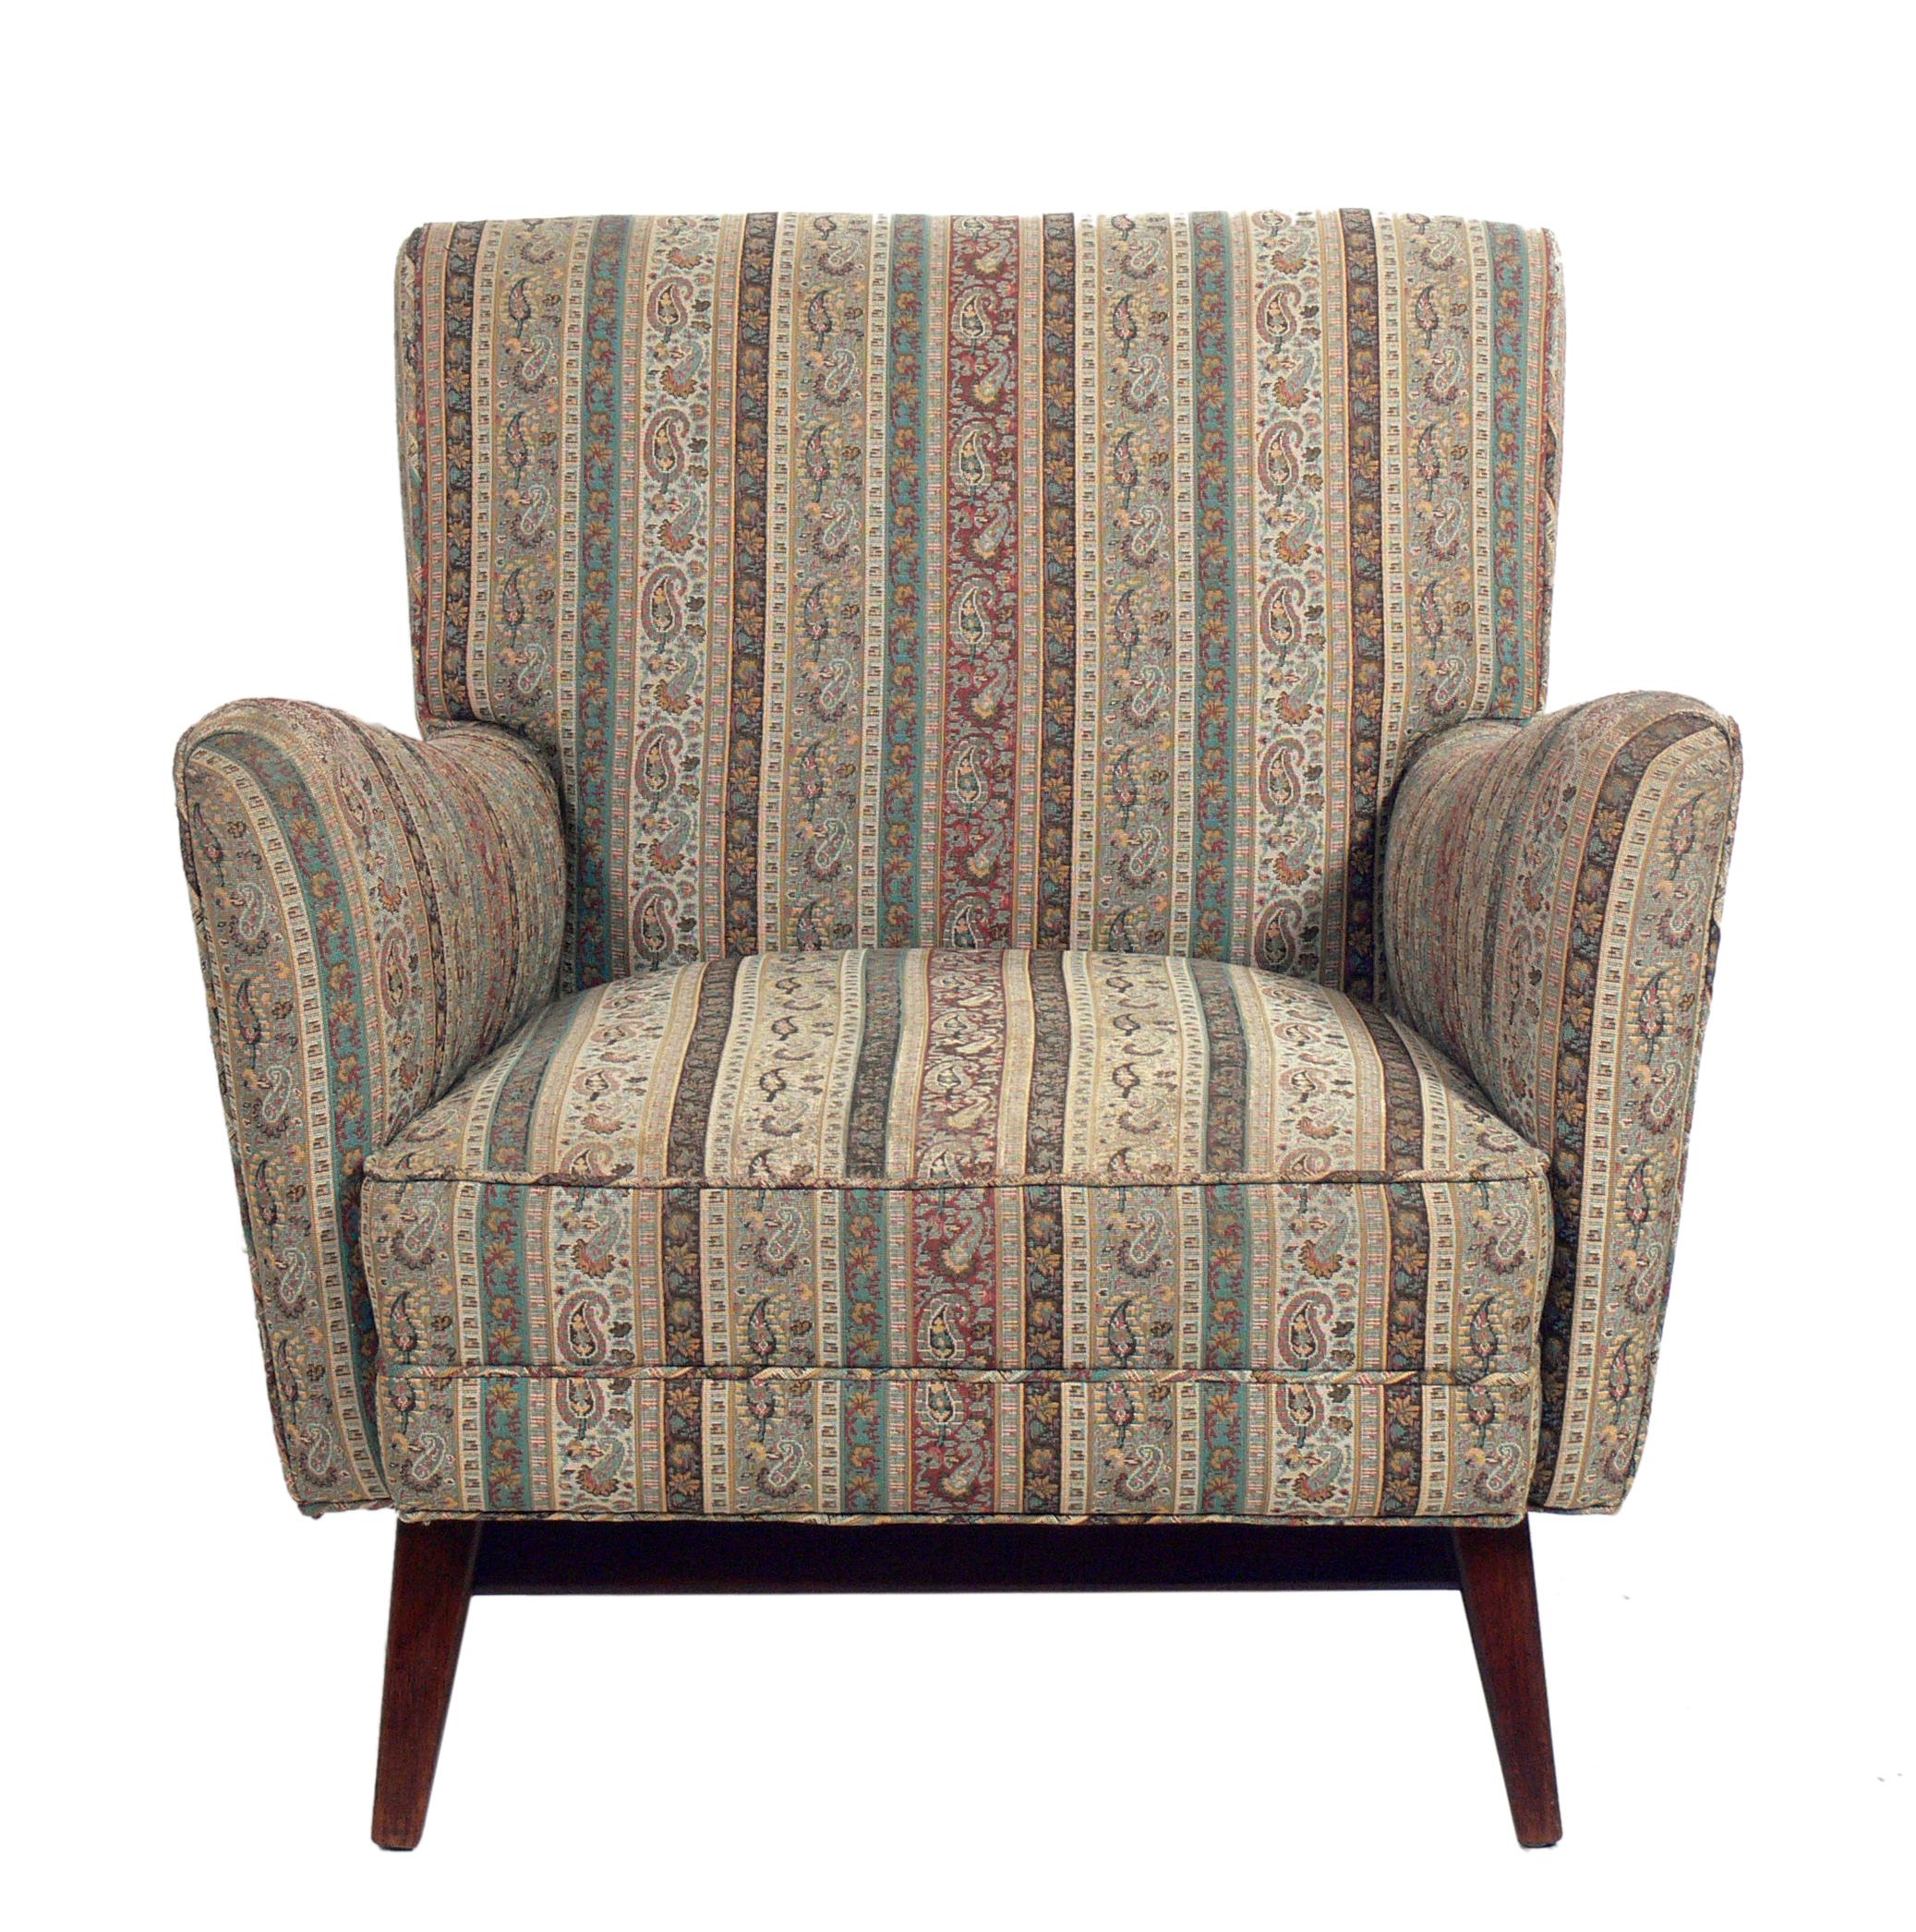 Curvaceous modern lounge chair, attributed to Jens Risom, American, circa 1960s. This chair is currently being reupholstered and can be completed in your fabric. The price noted includes reupholstery in your fabric. The walnut base has been cleaned